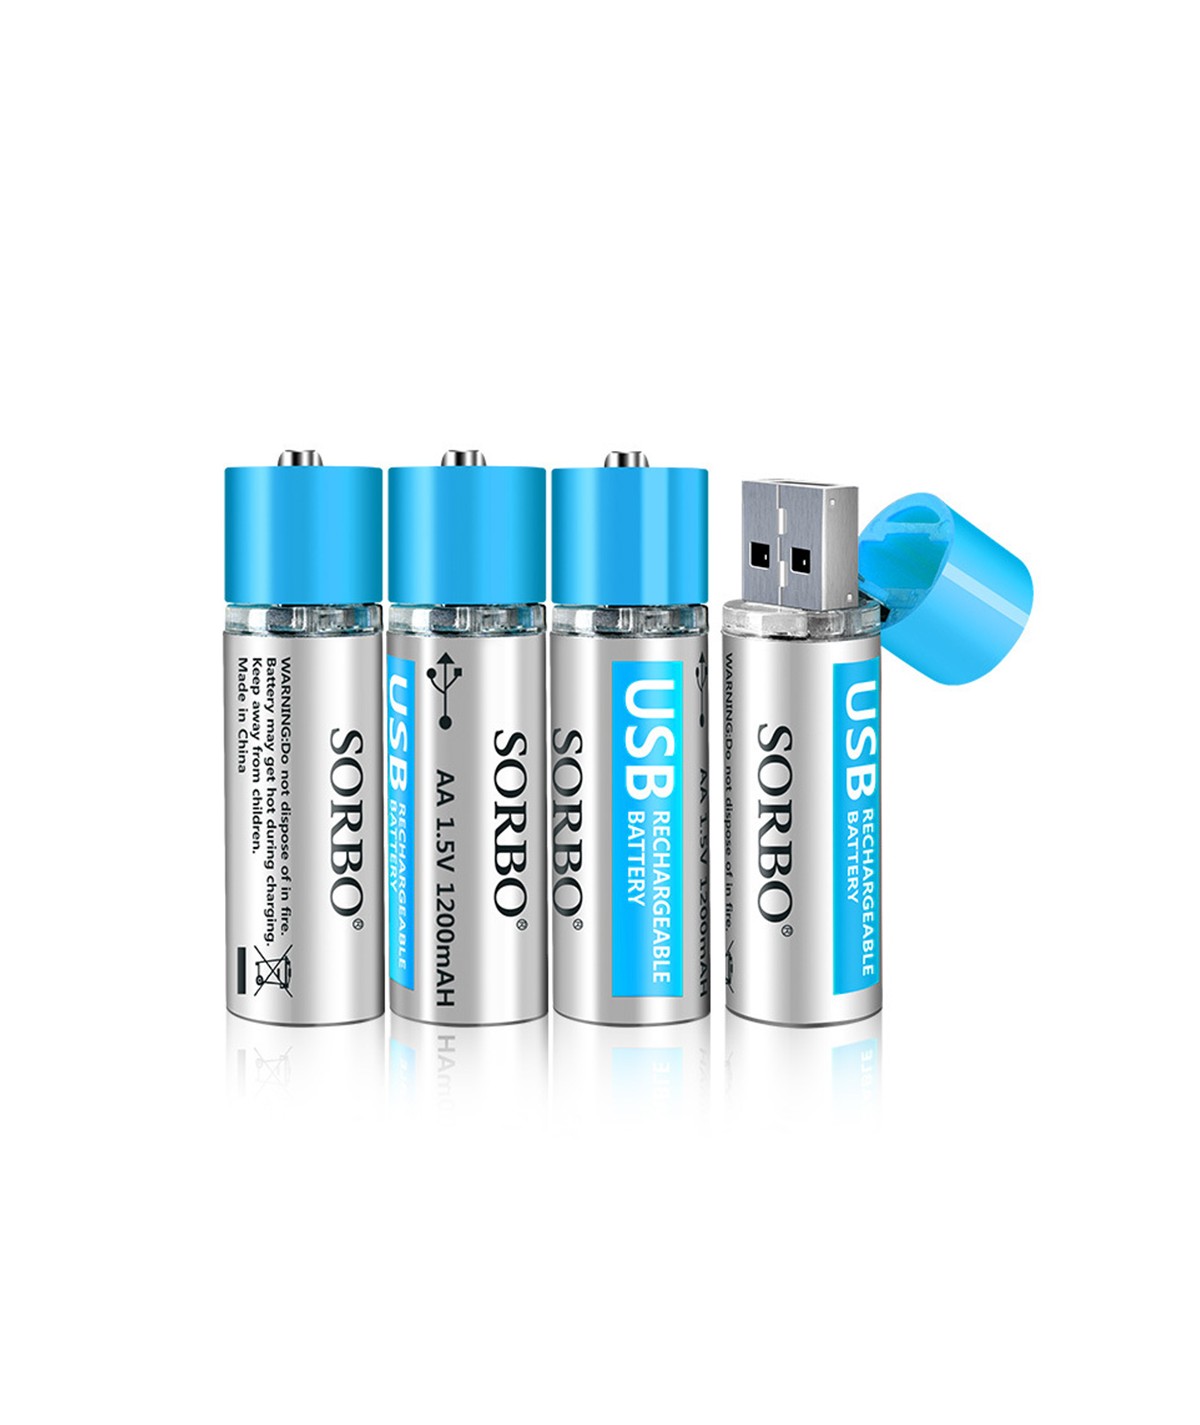 enfermero Banco puenting USB Rechargeable AA Battery (x4) Color Blue